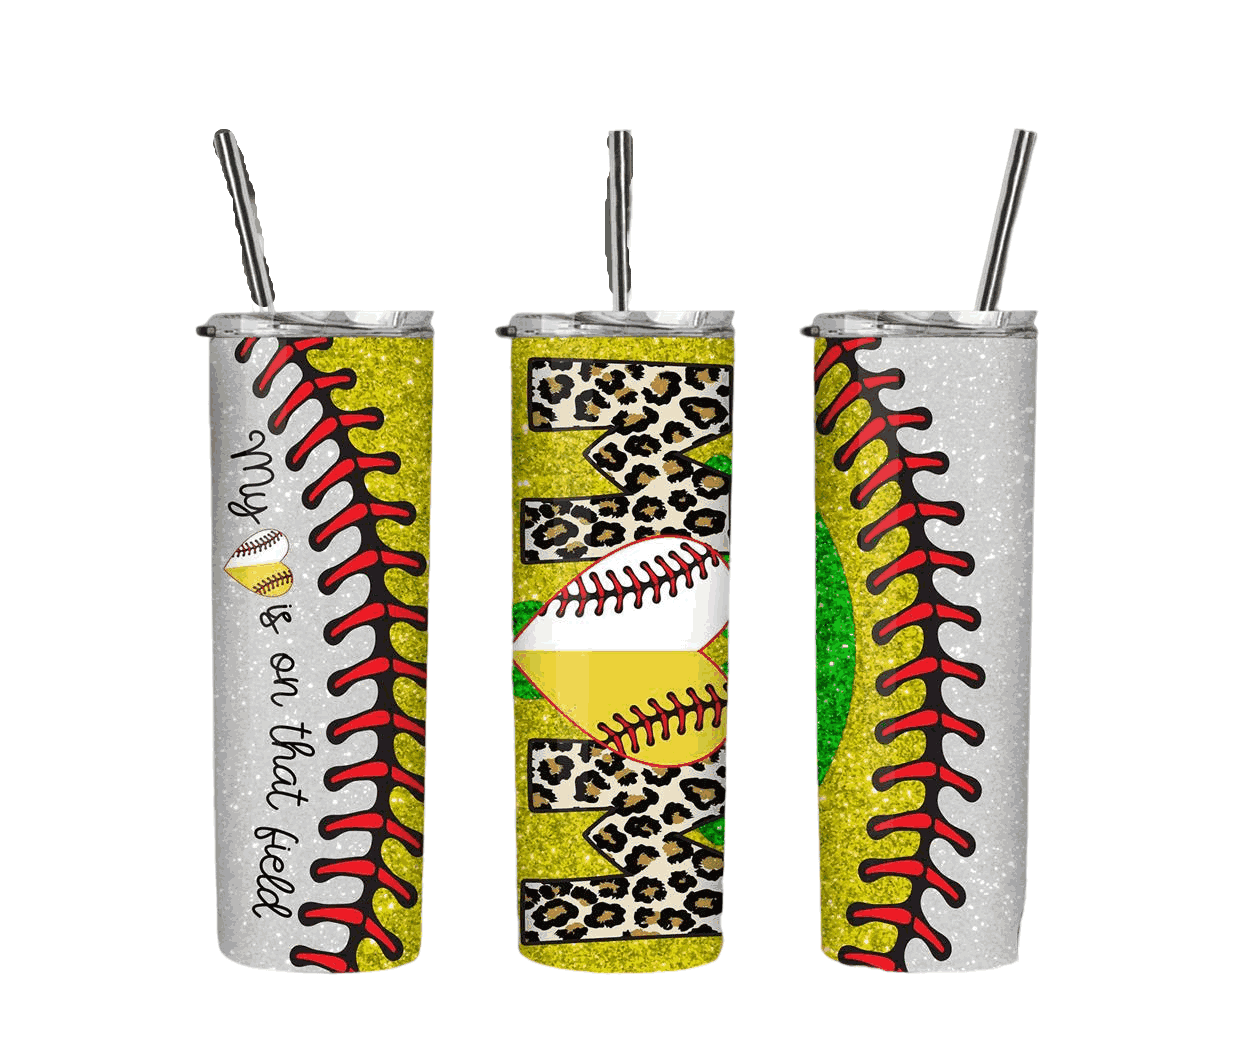 Softball Baseball Mom Script With Leopard Pattern And Glitter Yellow And Glitter Silver On Both Sides